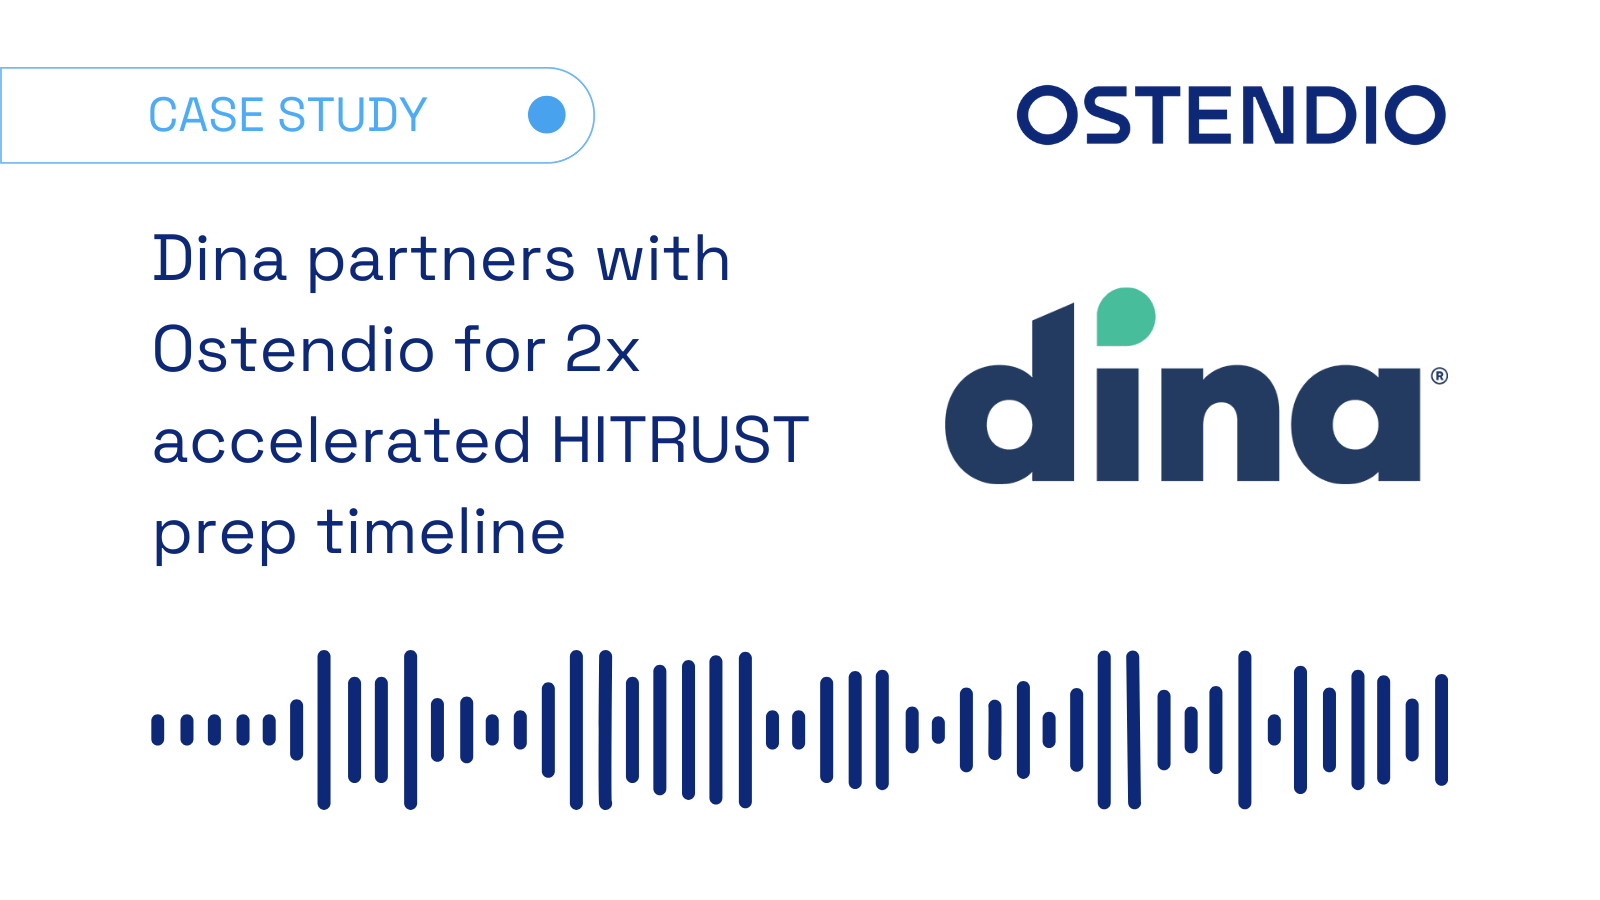  Dina accelerates HITRUST audit prep timeline by 50% with Ostendio (3)